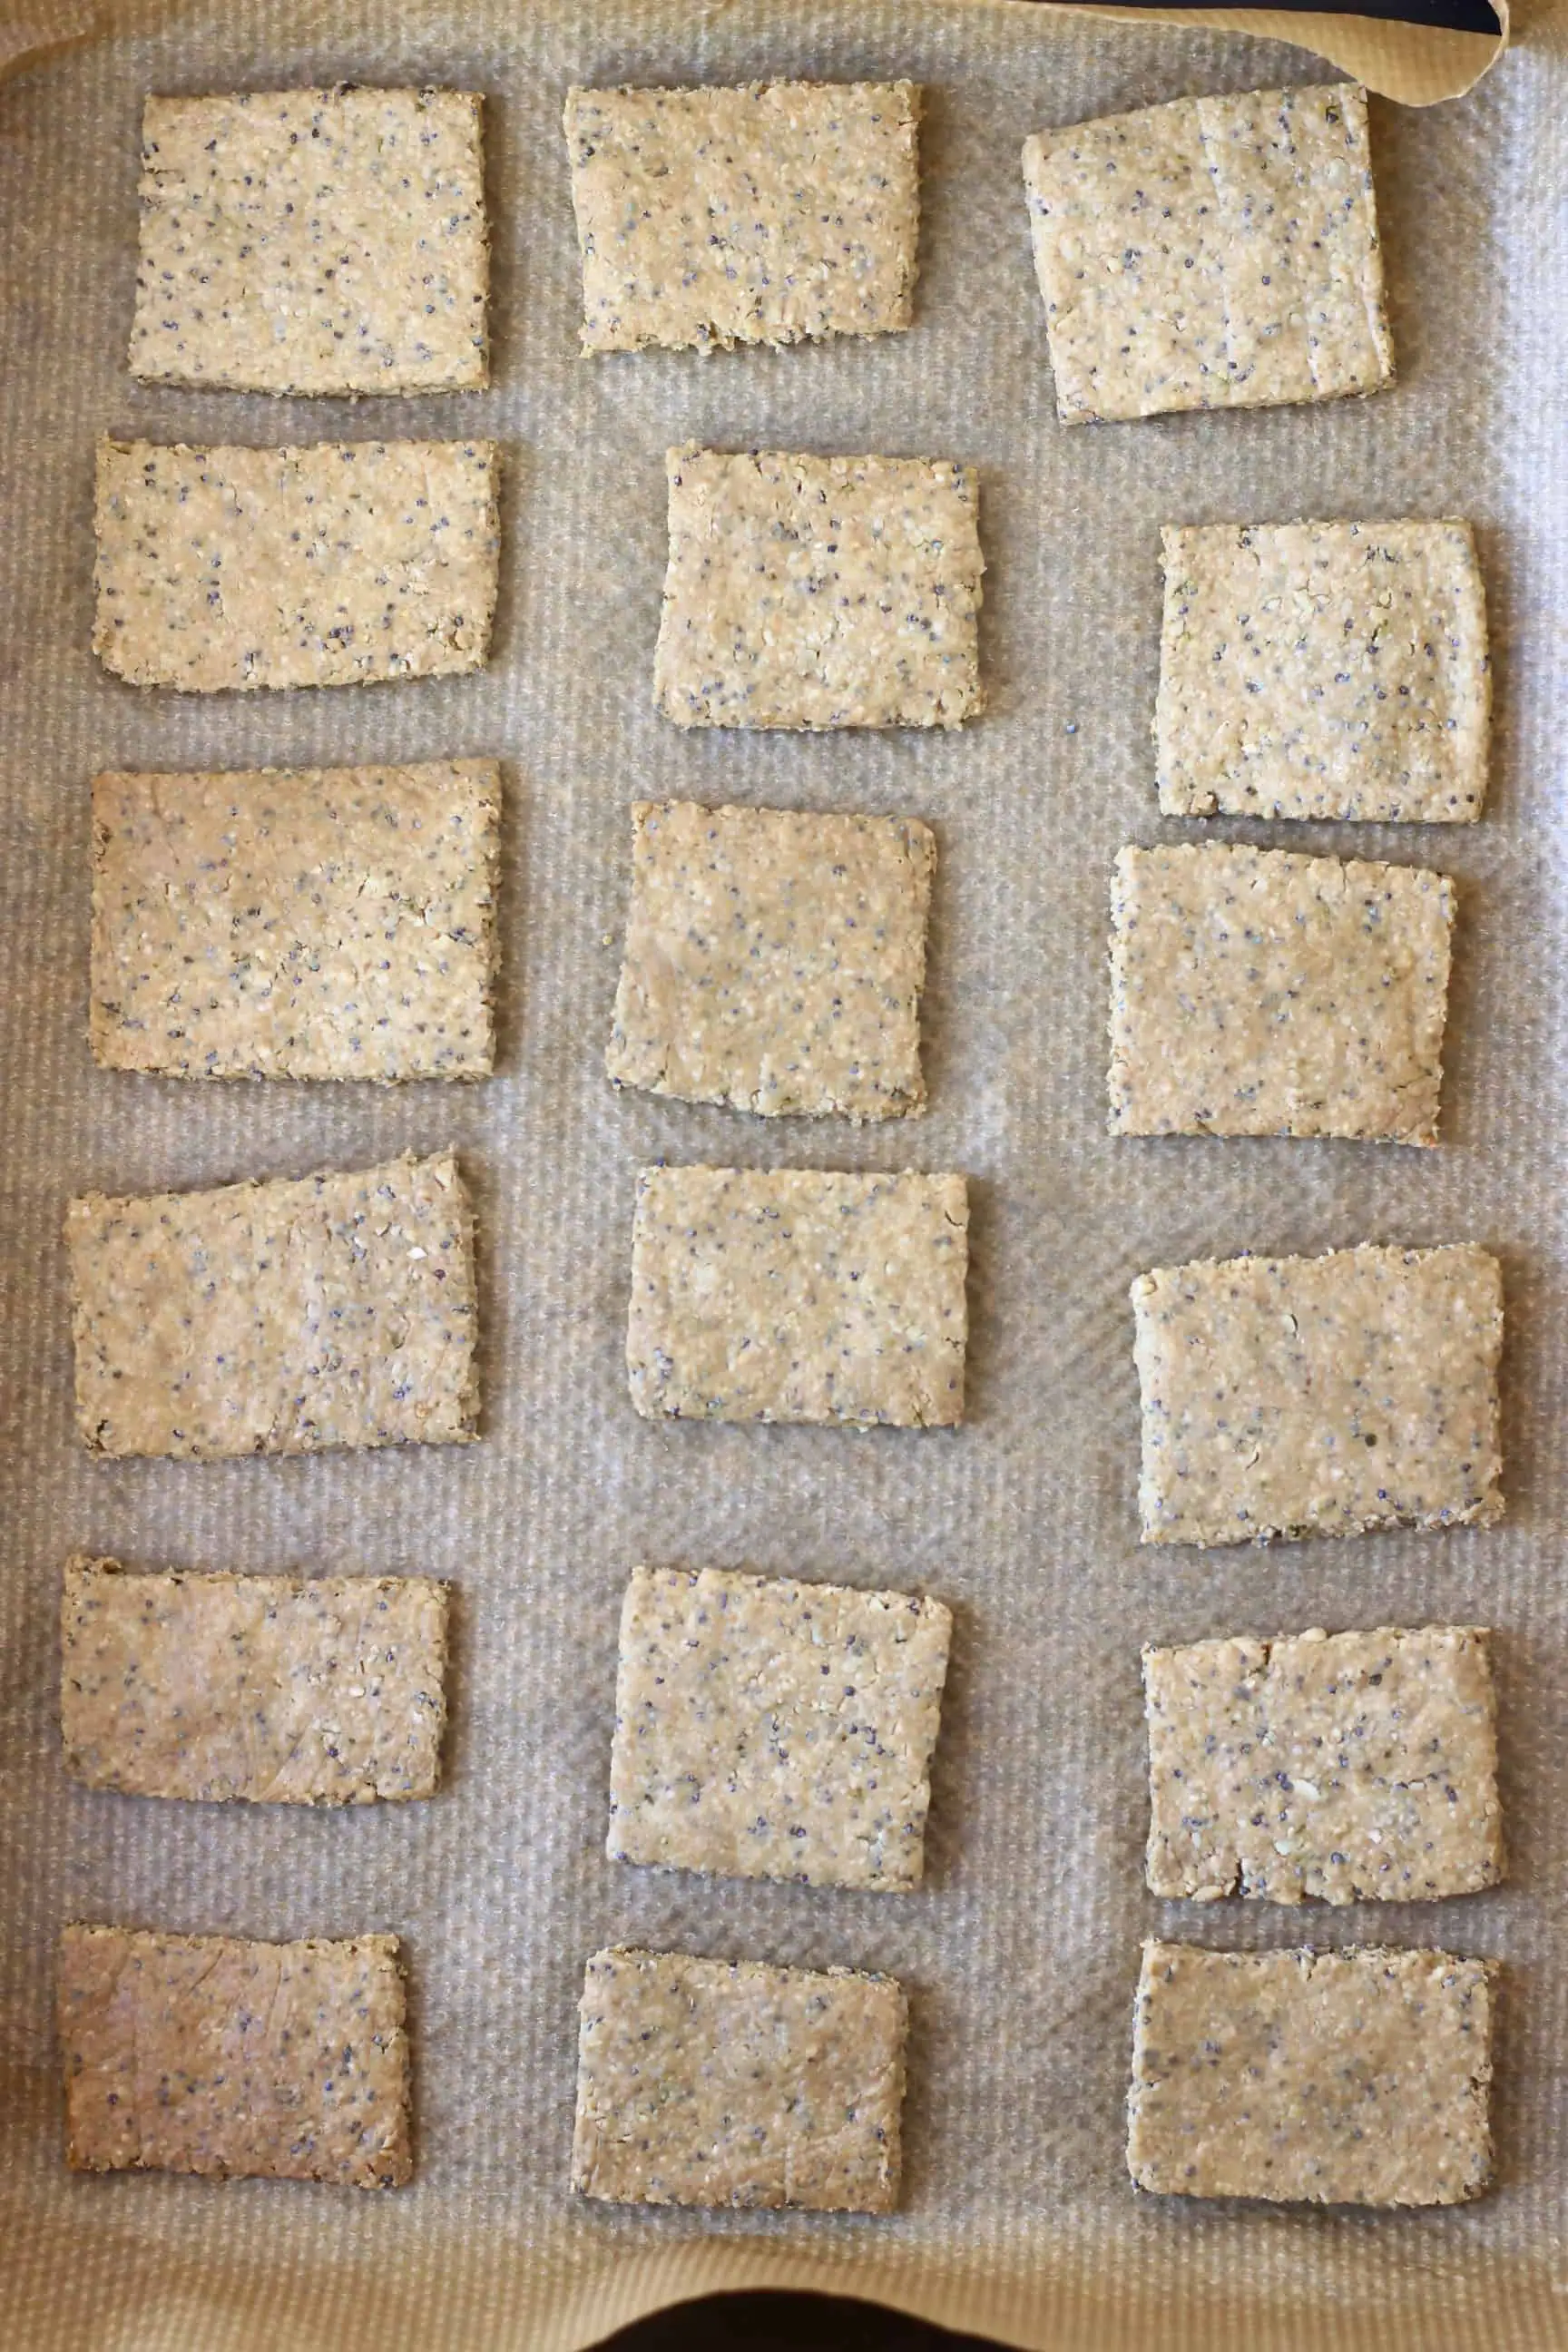 Eighteen square baked gluten-free vegan crackers on a baking tray lined with baking paper